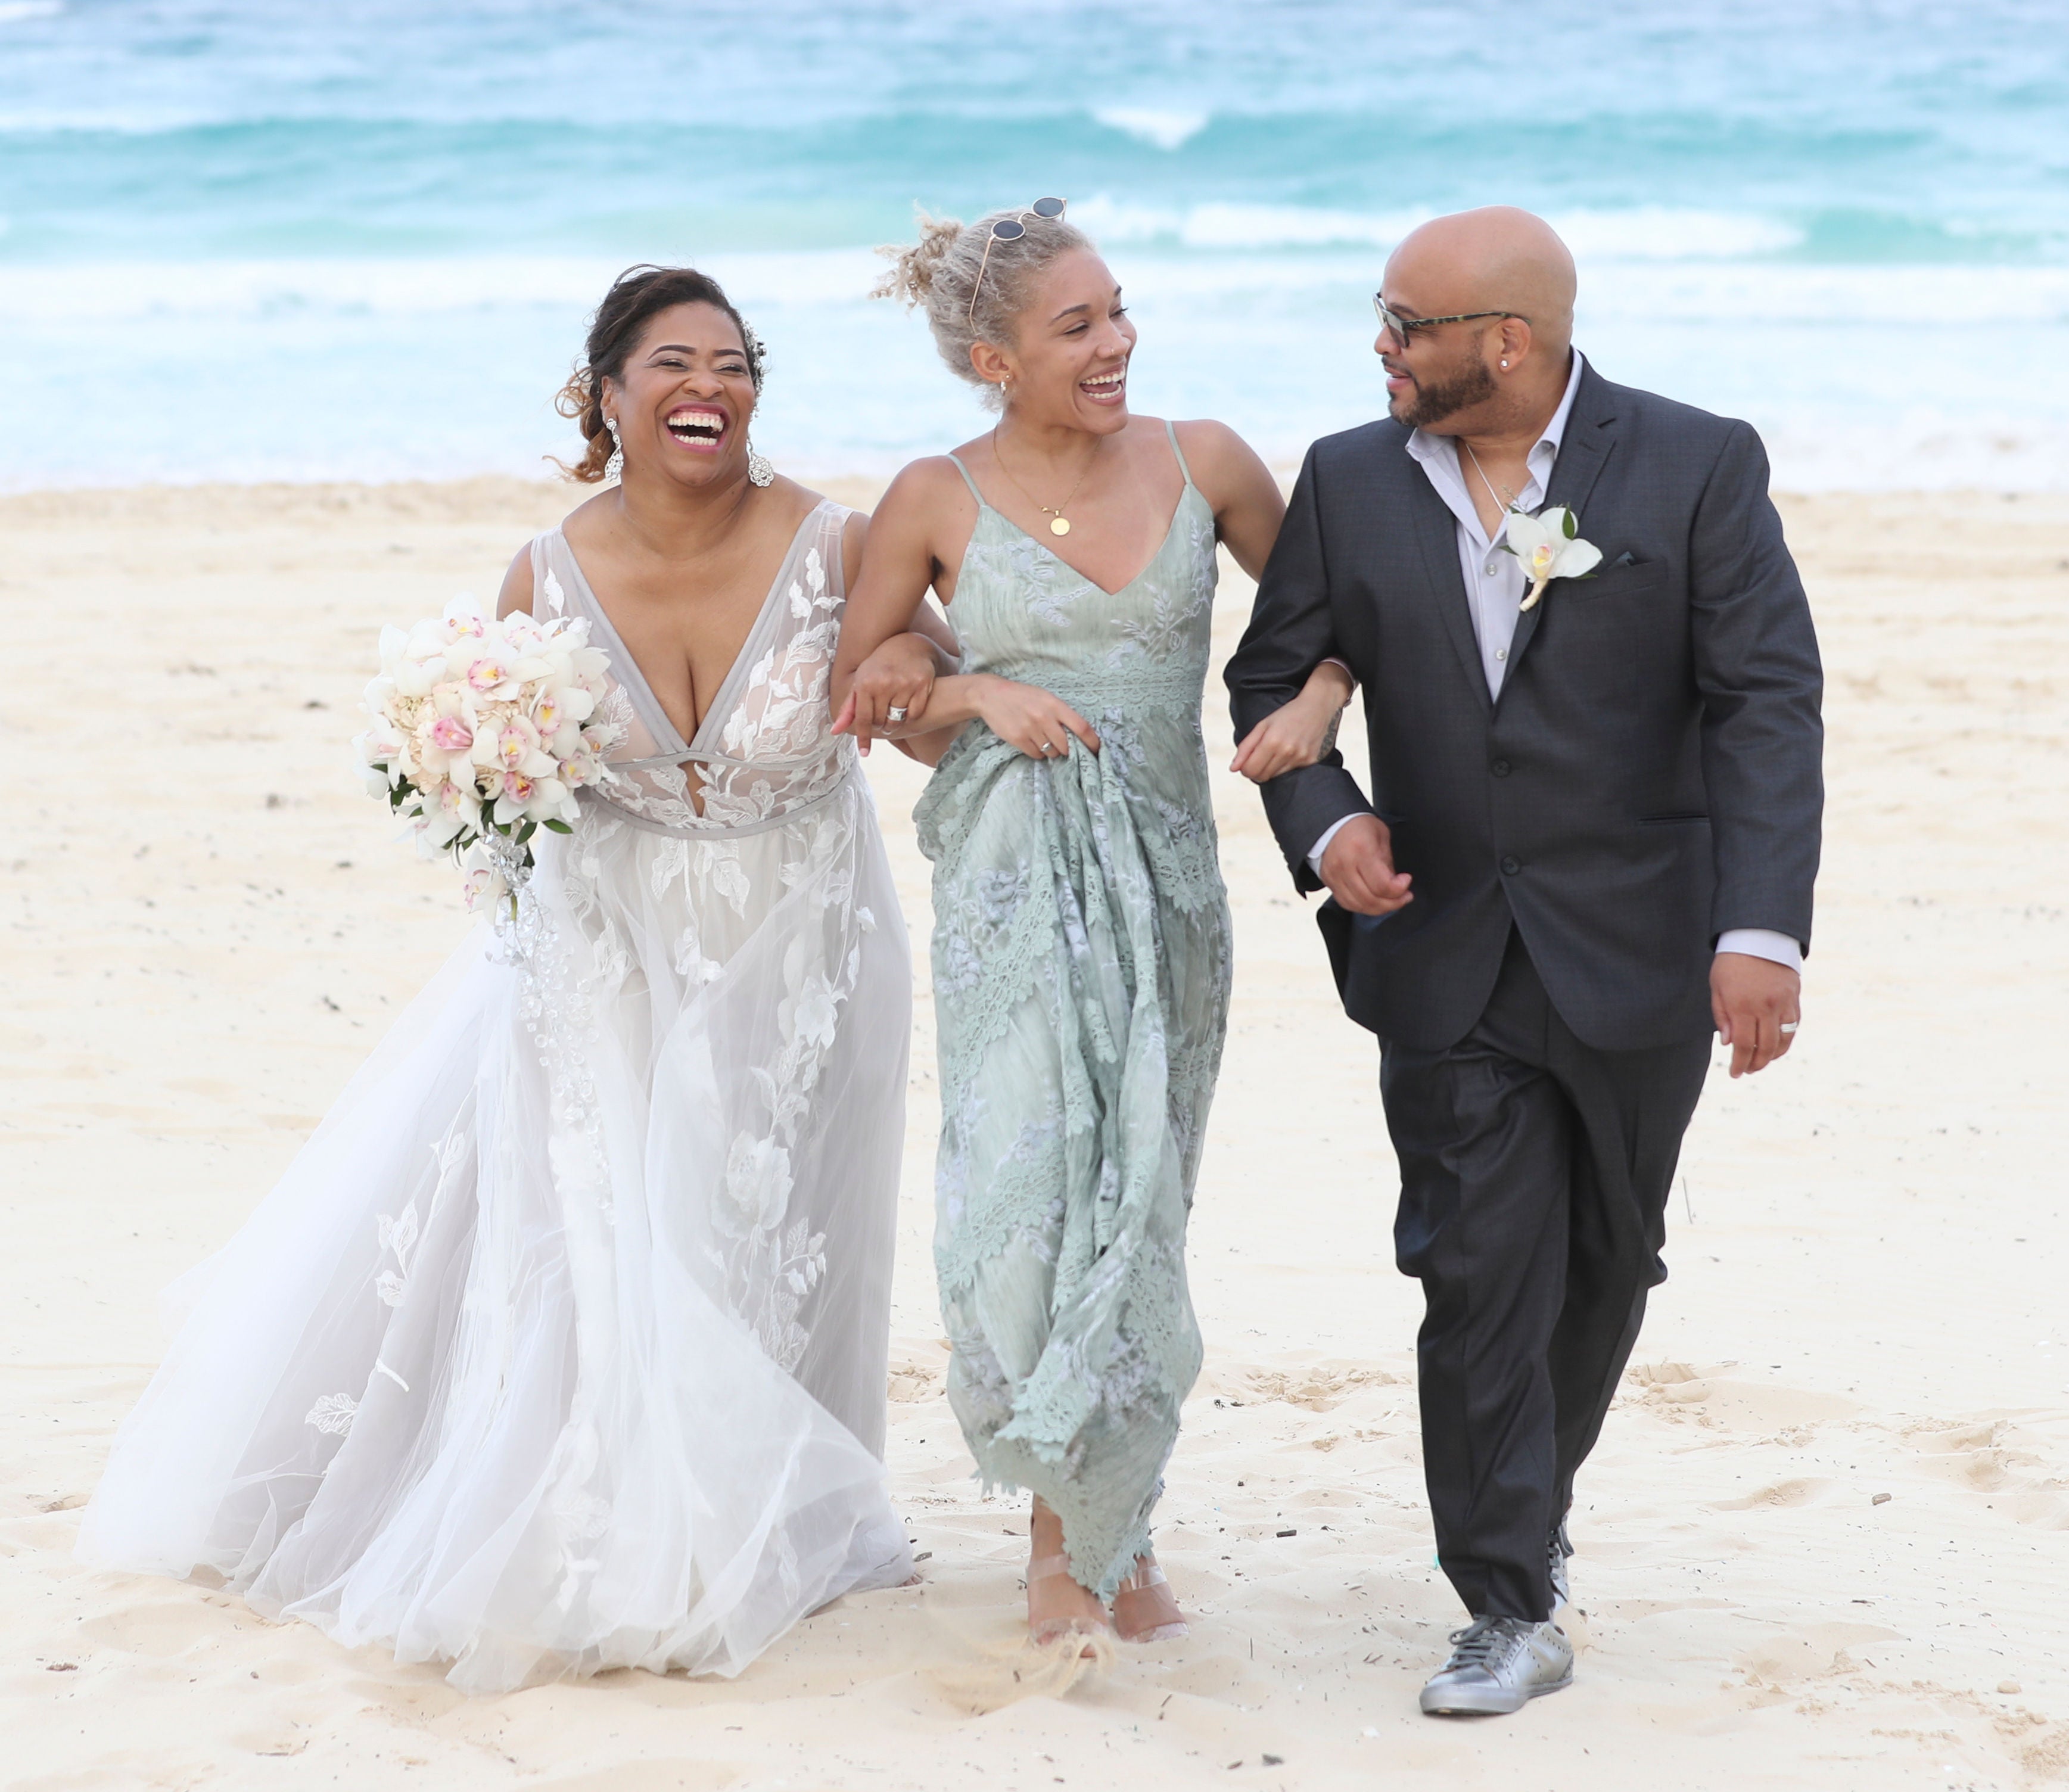 Bridal Bliss: Dorian and Darryl Did It Their Way With This Laid-Back Beach Wedding